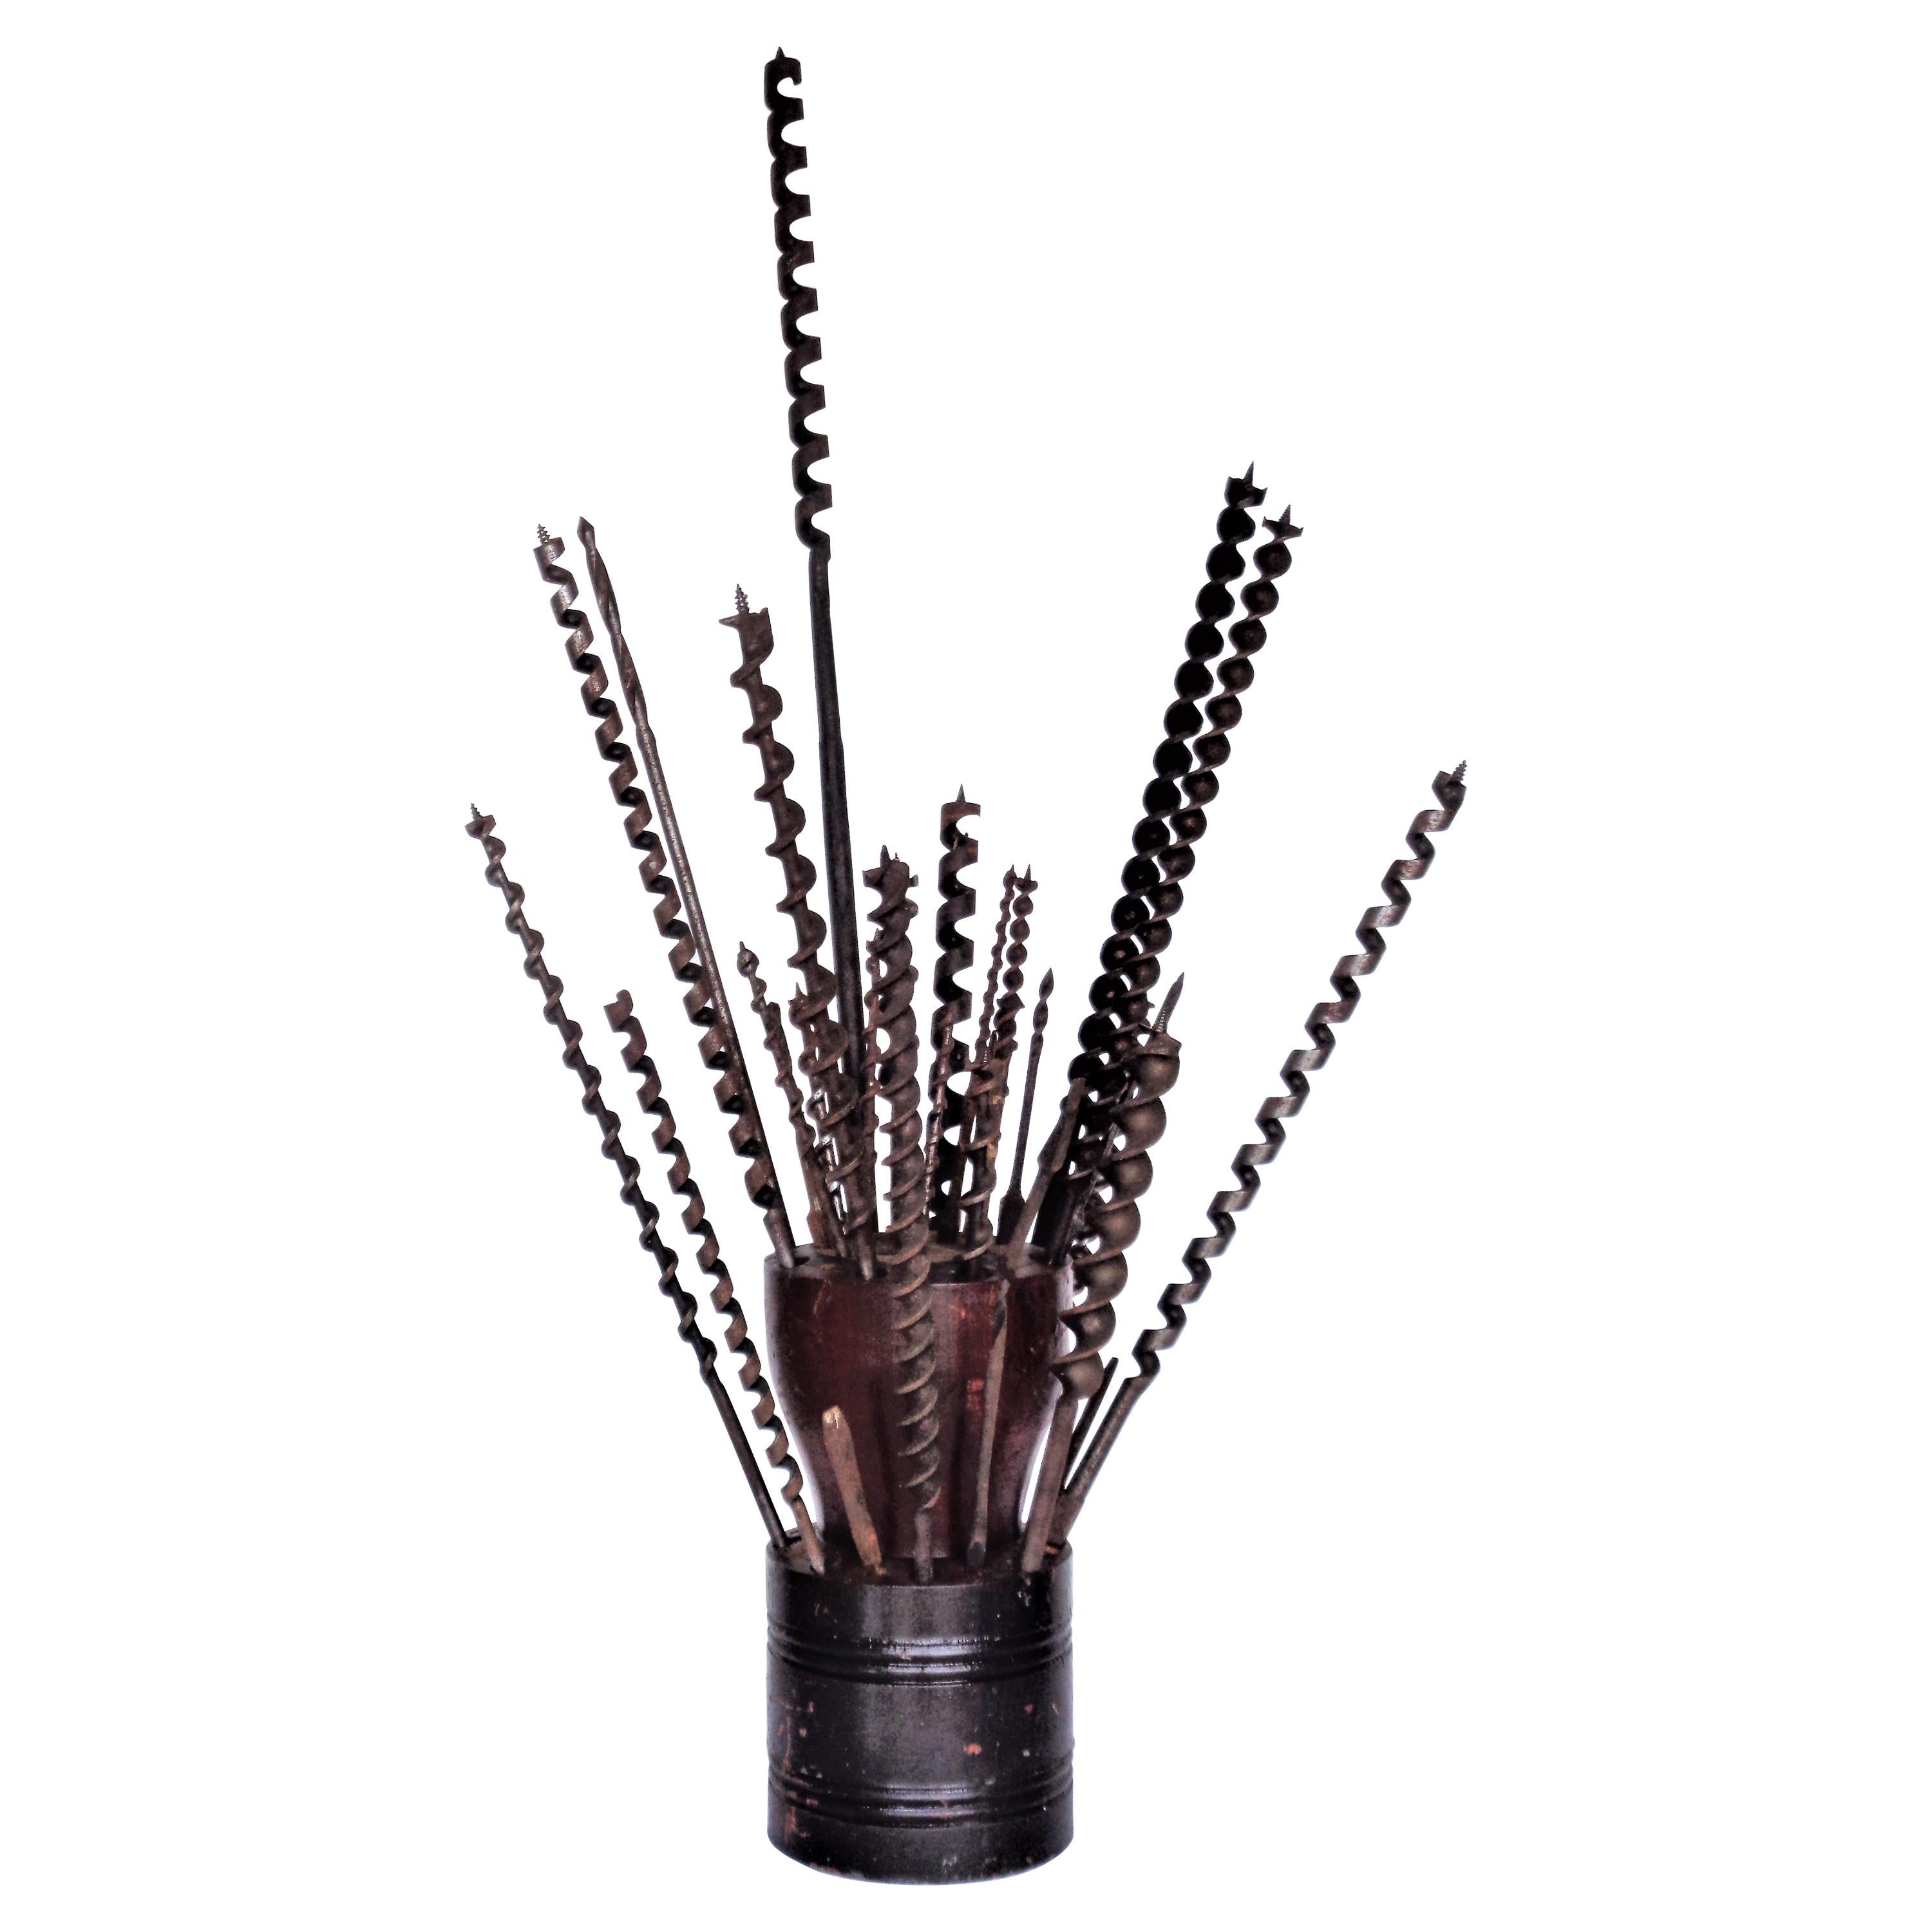 Antique Drill Bit Holder & Drill Bits, As Found Industrial Sculpture For Sale